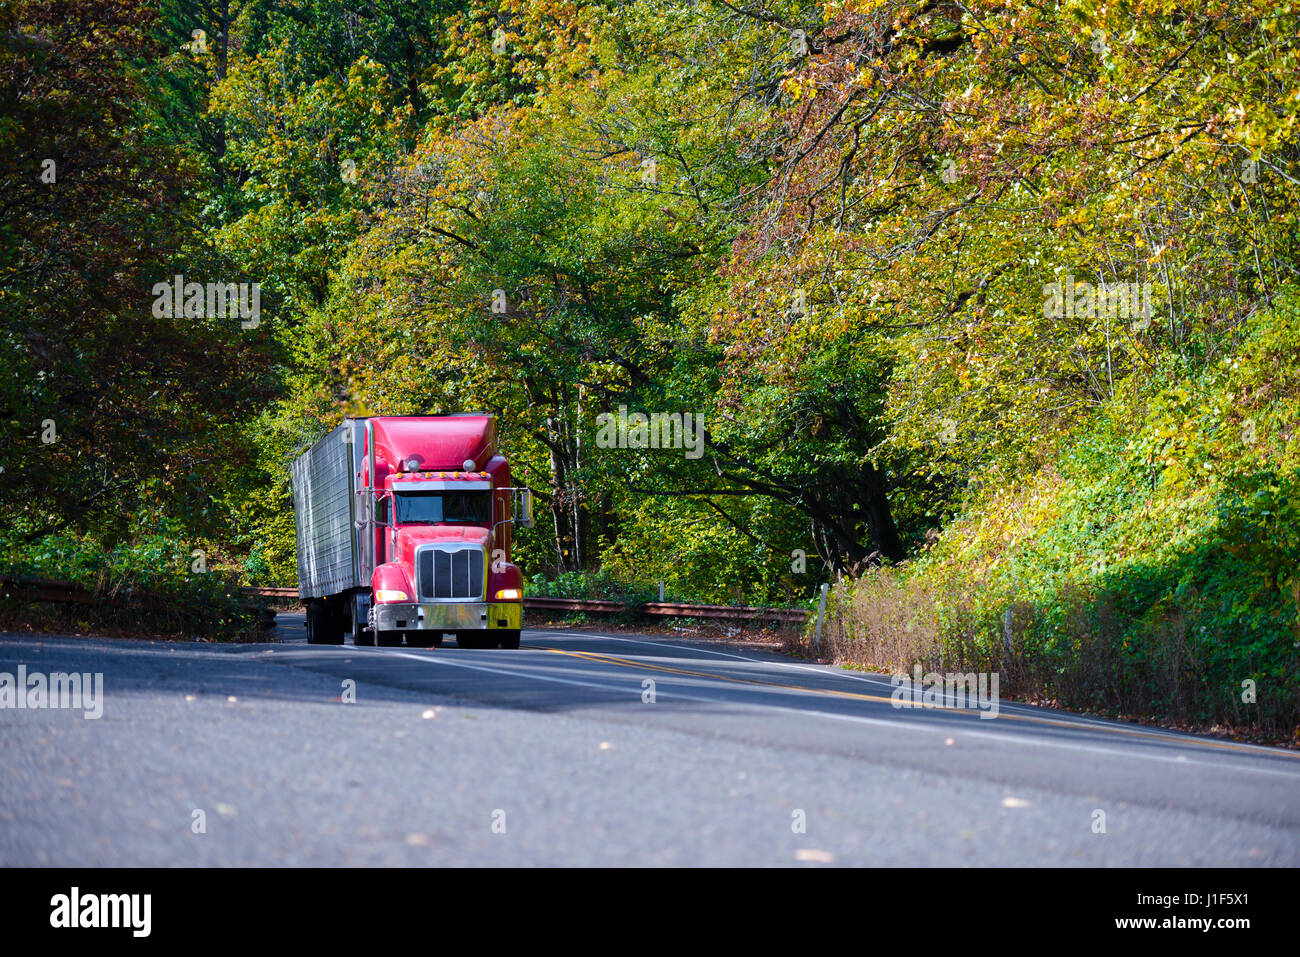 Professional red big rig semi truck with refrigerated trailer rides up the hill on the scenic highway among autumn yellow and green trees. Stock Photo